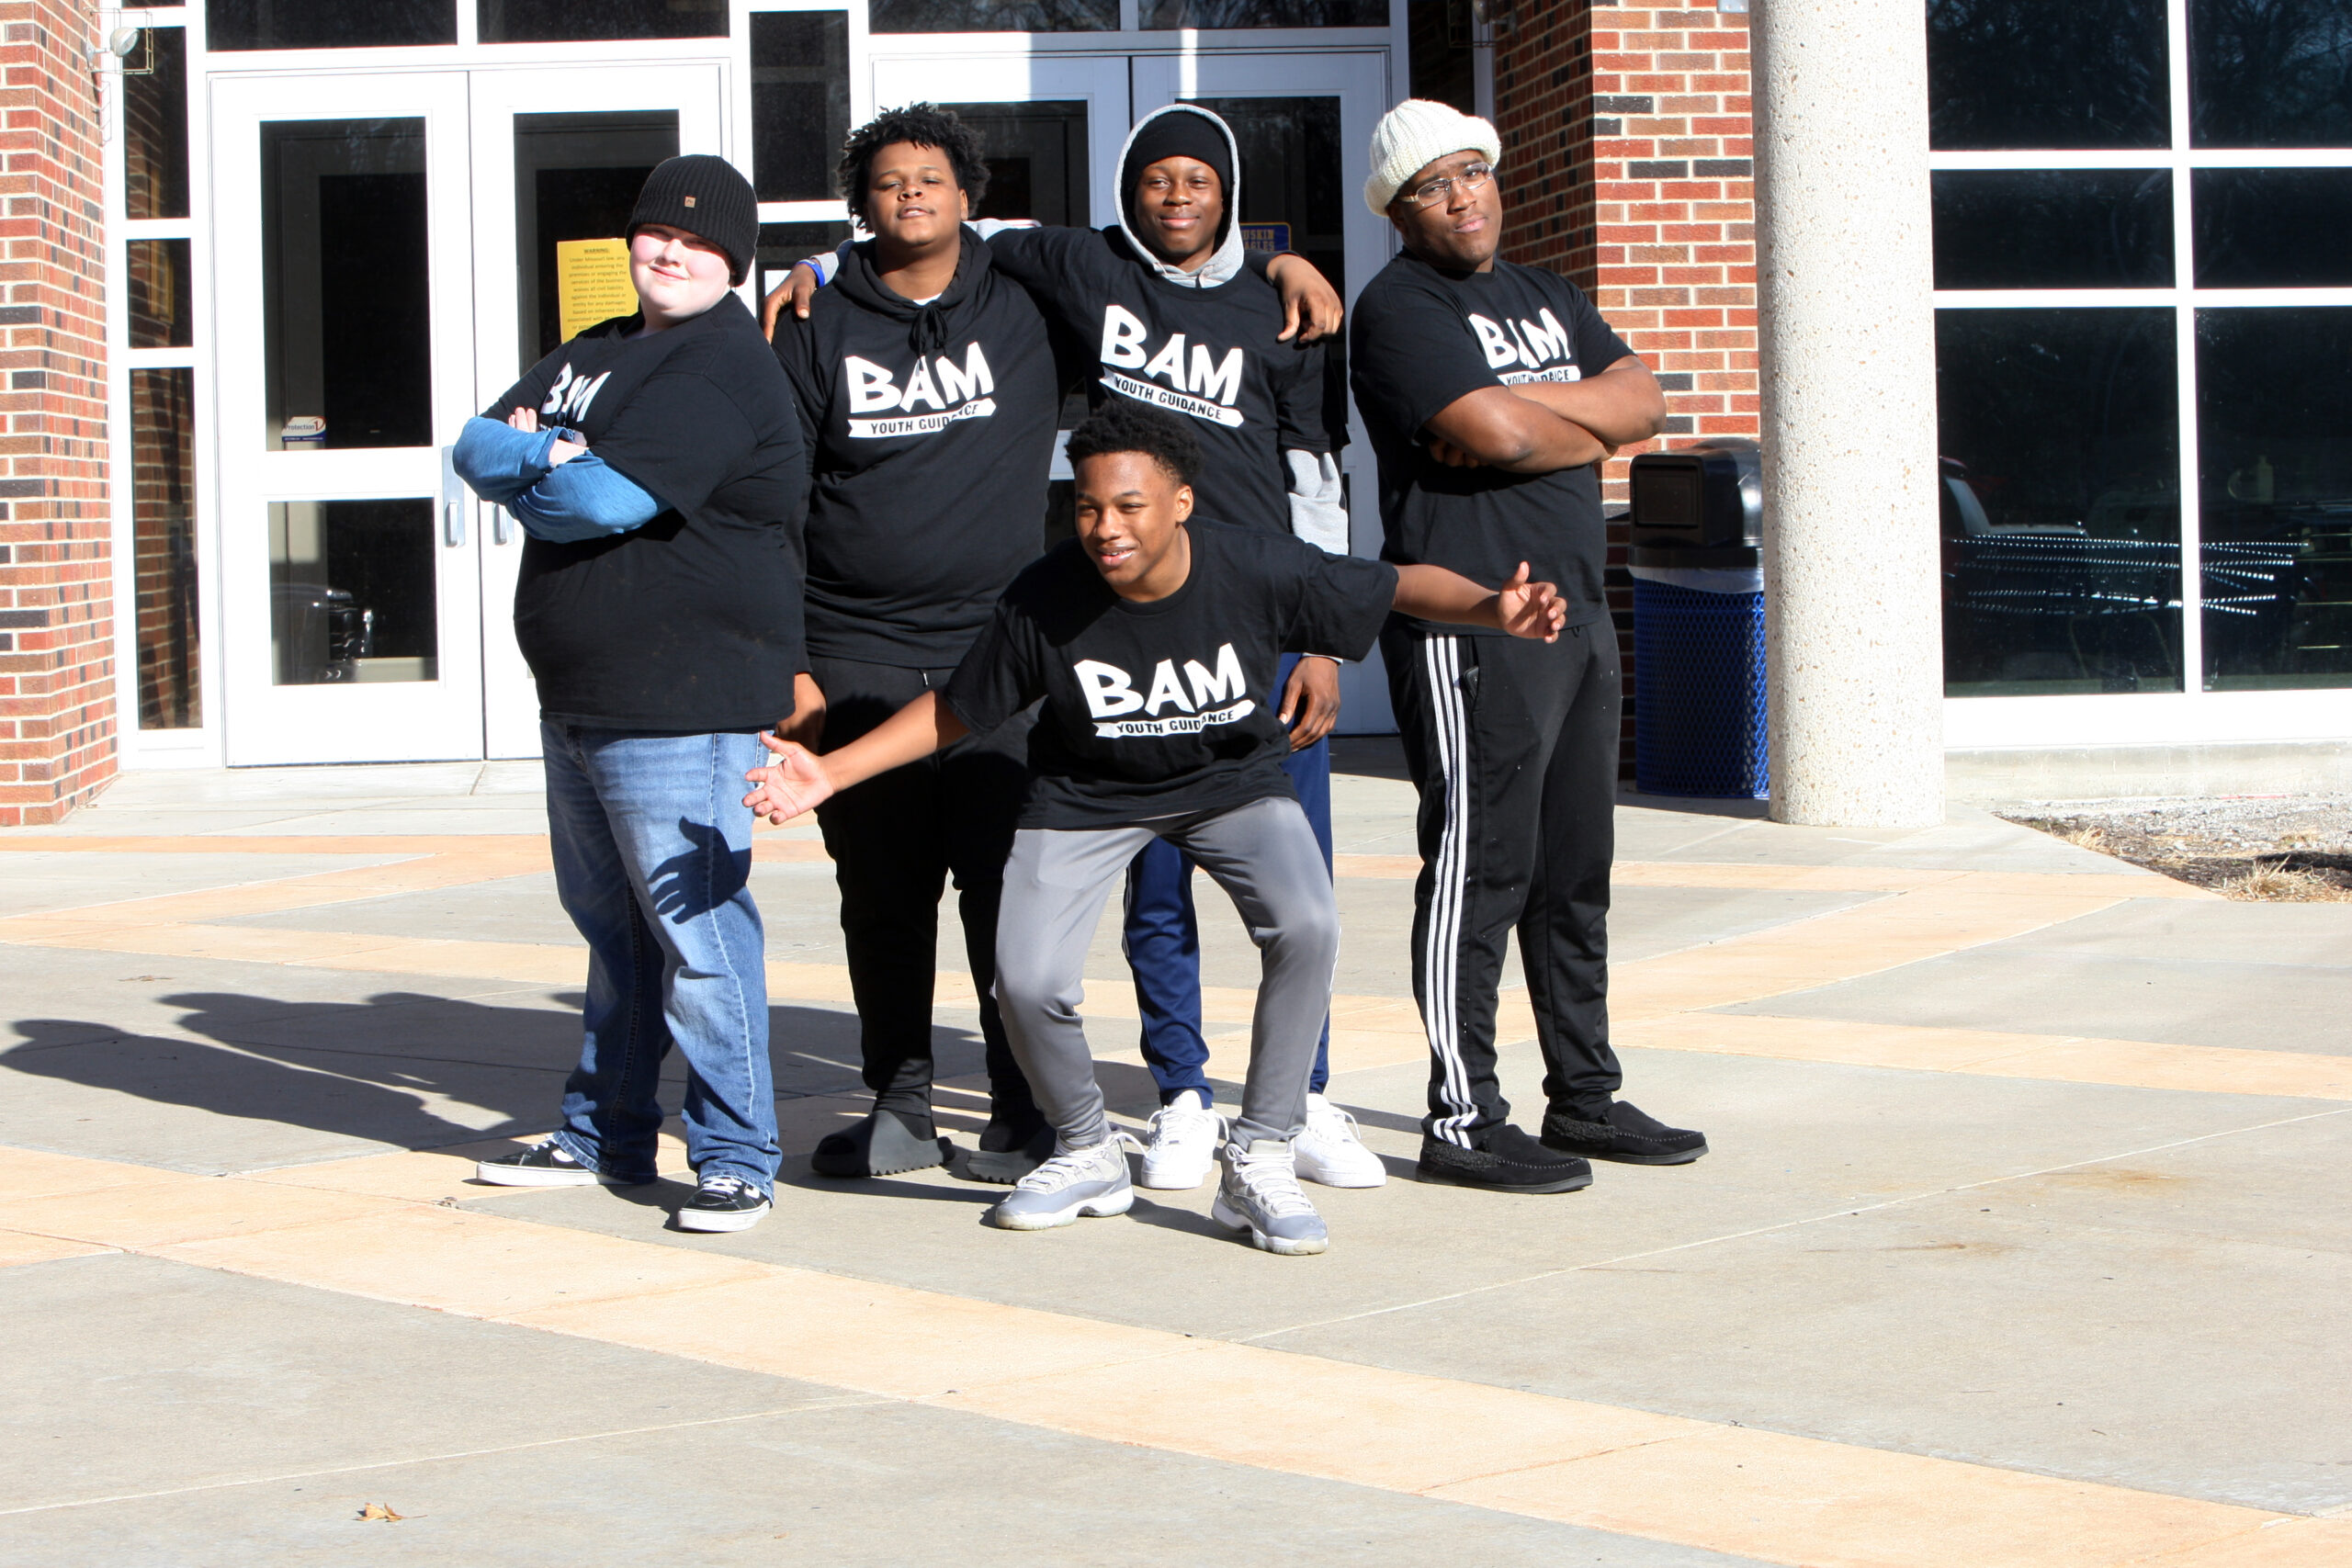 BAM® – Becoming A Man – Youth Guidance